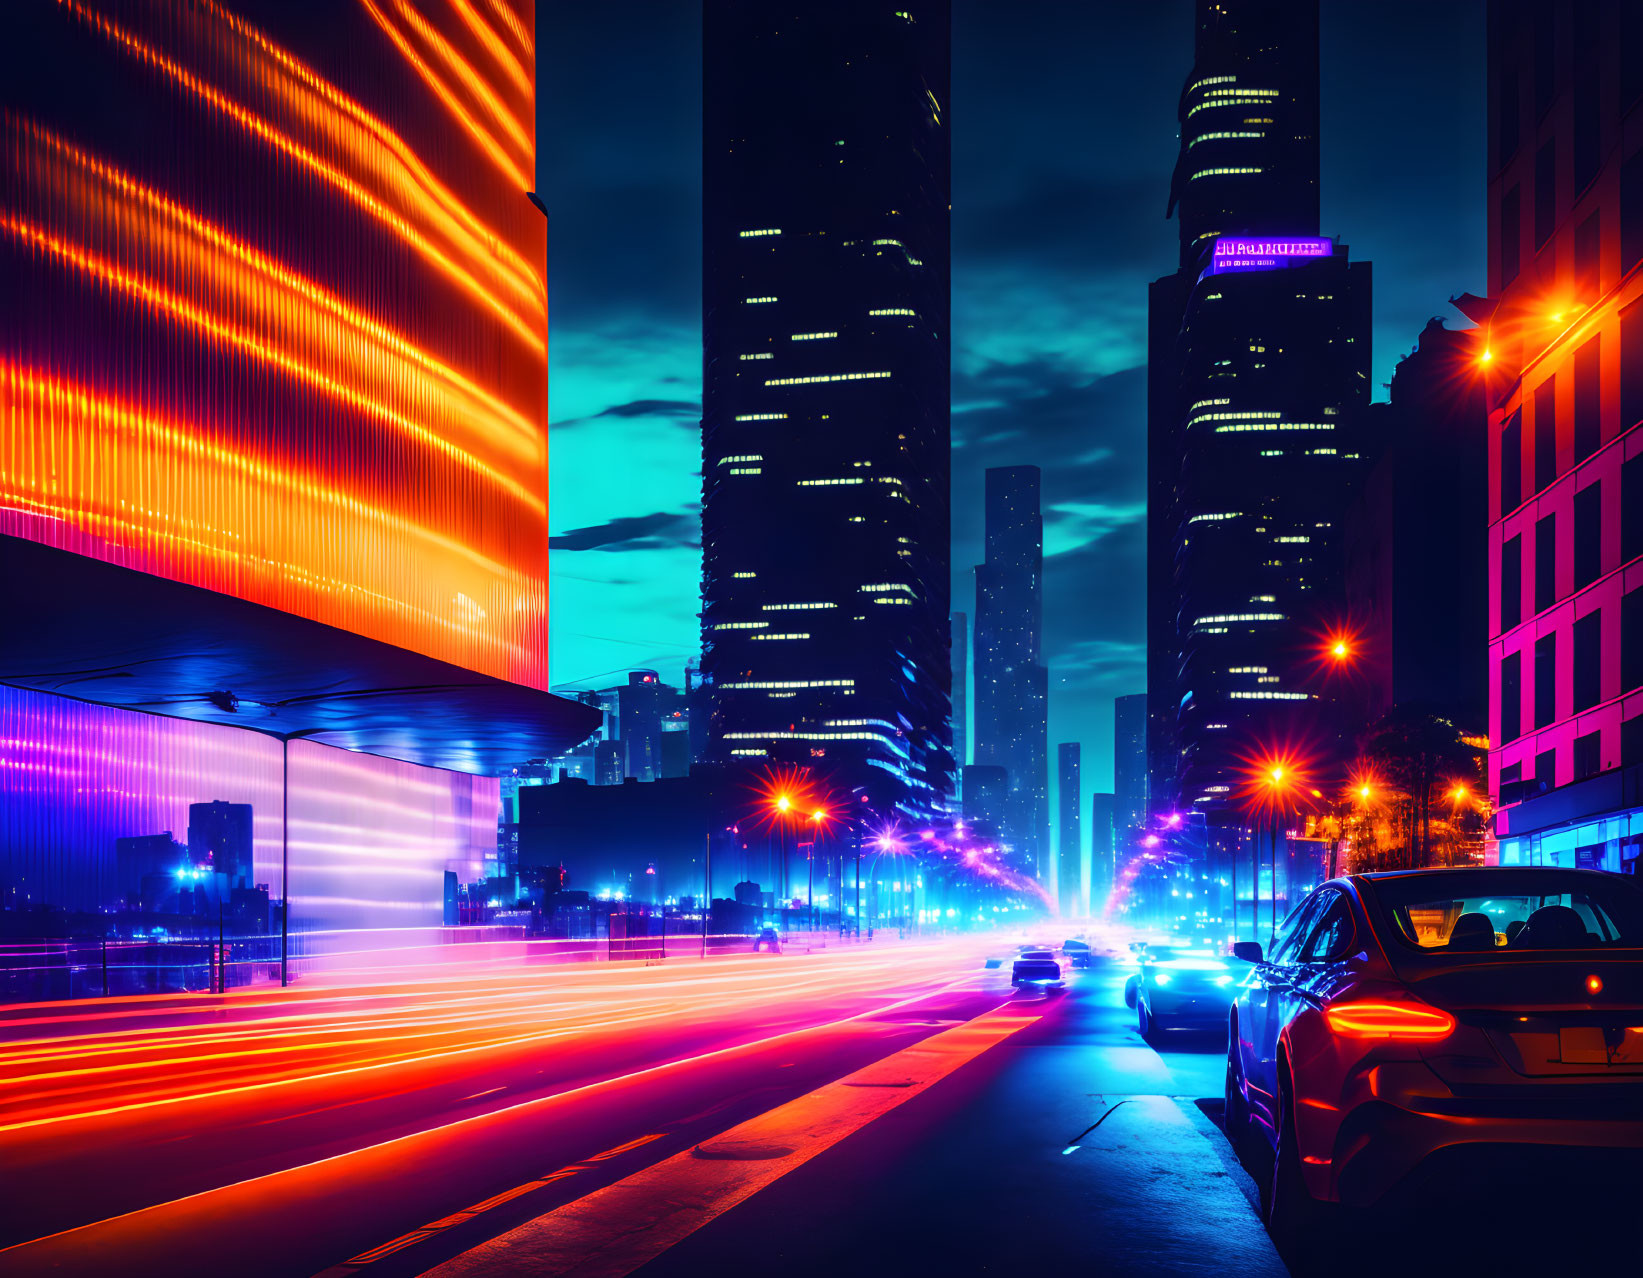 Neon-lit city street at twilight with car light trails and high-rise buildings